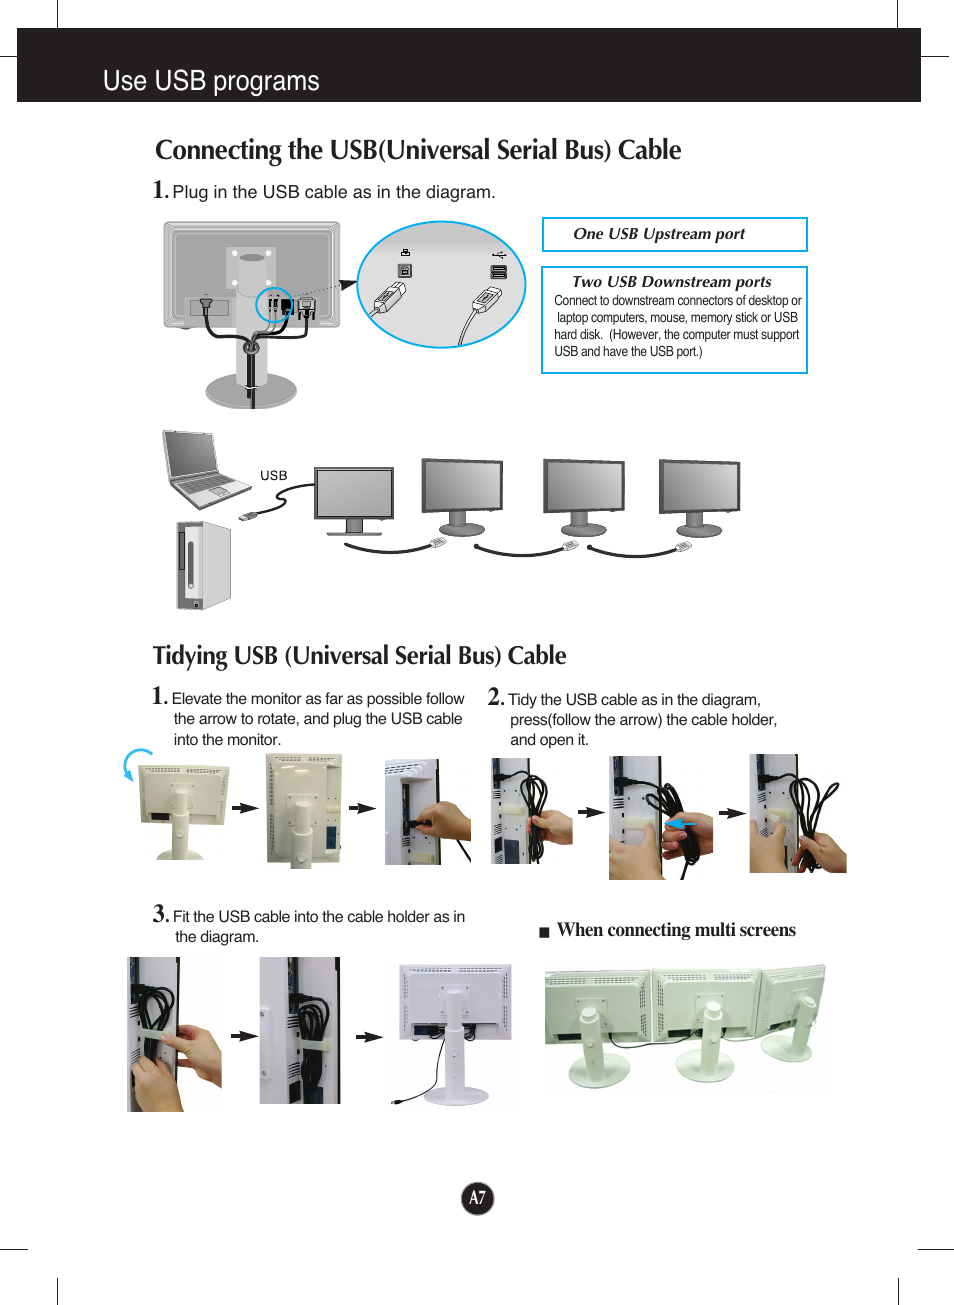 Use usb programs, Connecting the usb(universal serial bus) cable, Tidying usb (universal serial bus) cable | Tidying usb (universal serial bus) cable 3 | LG L226WU-PF User Manual | Page 8 / 28